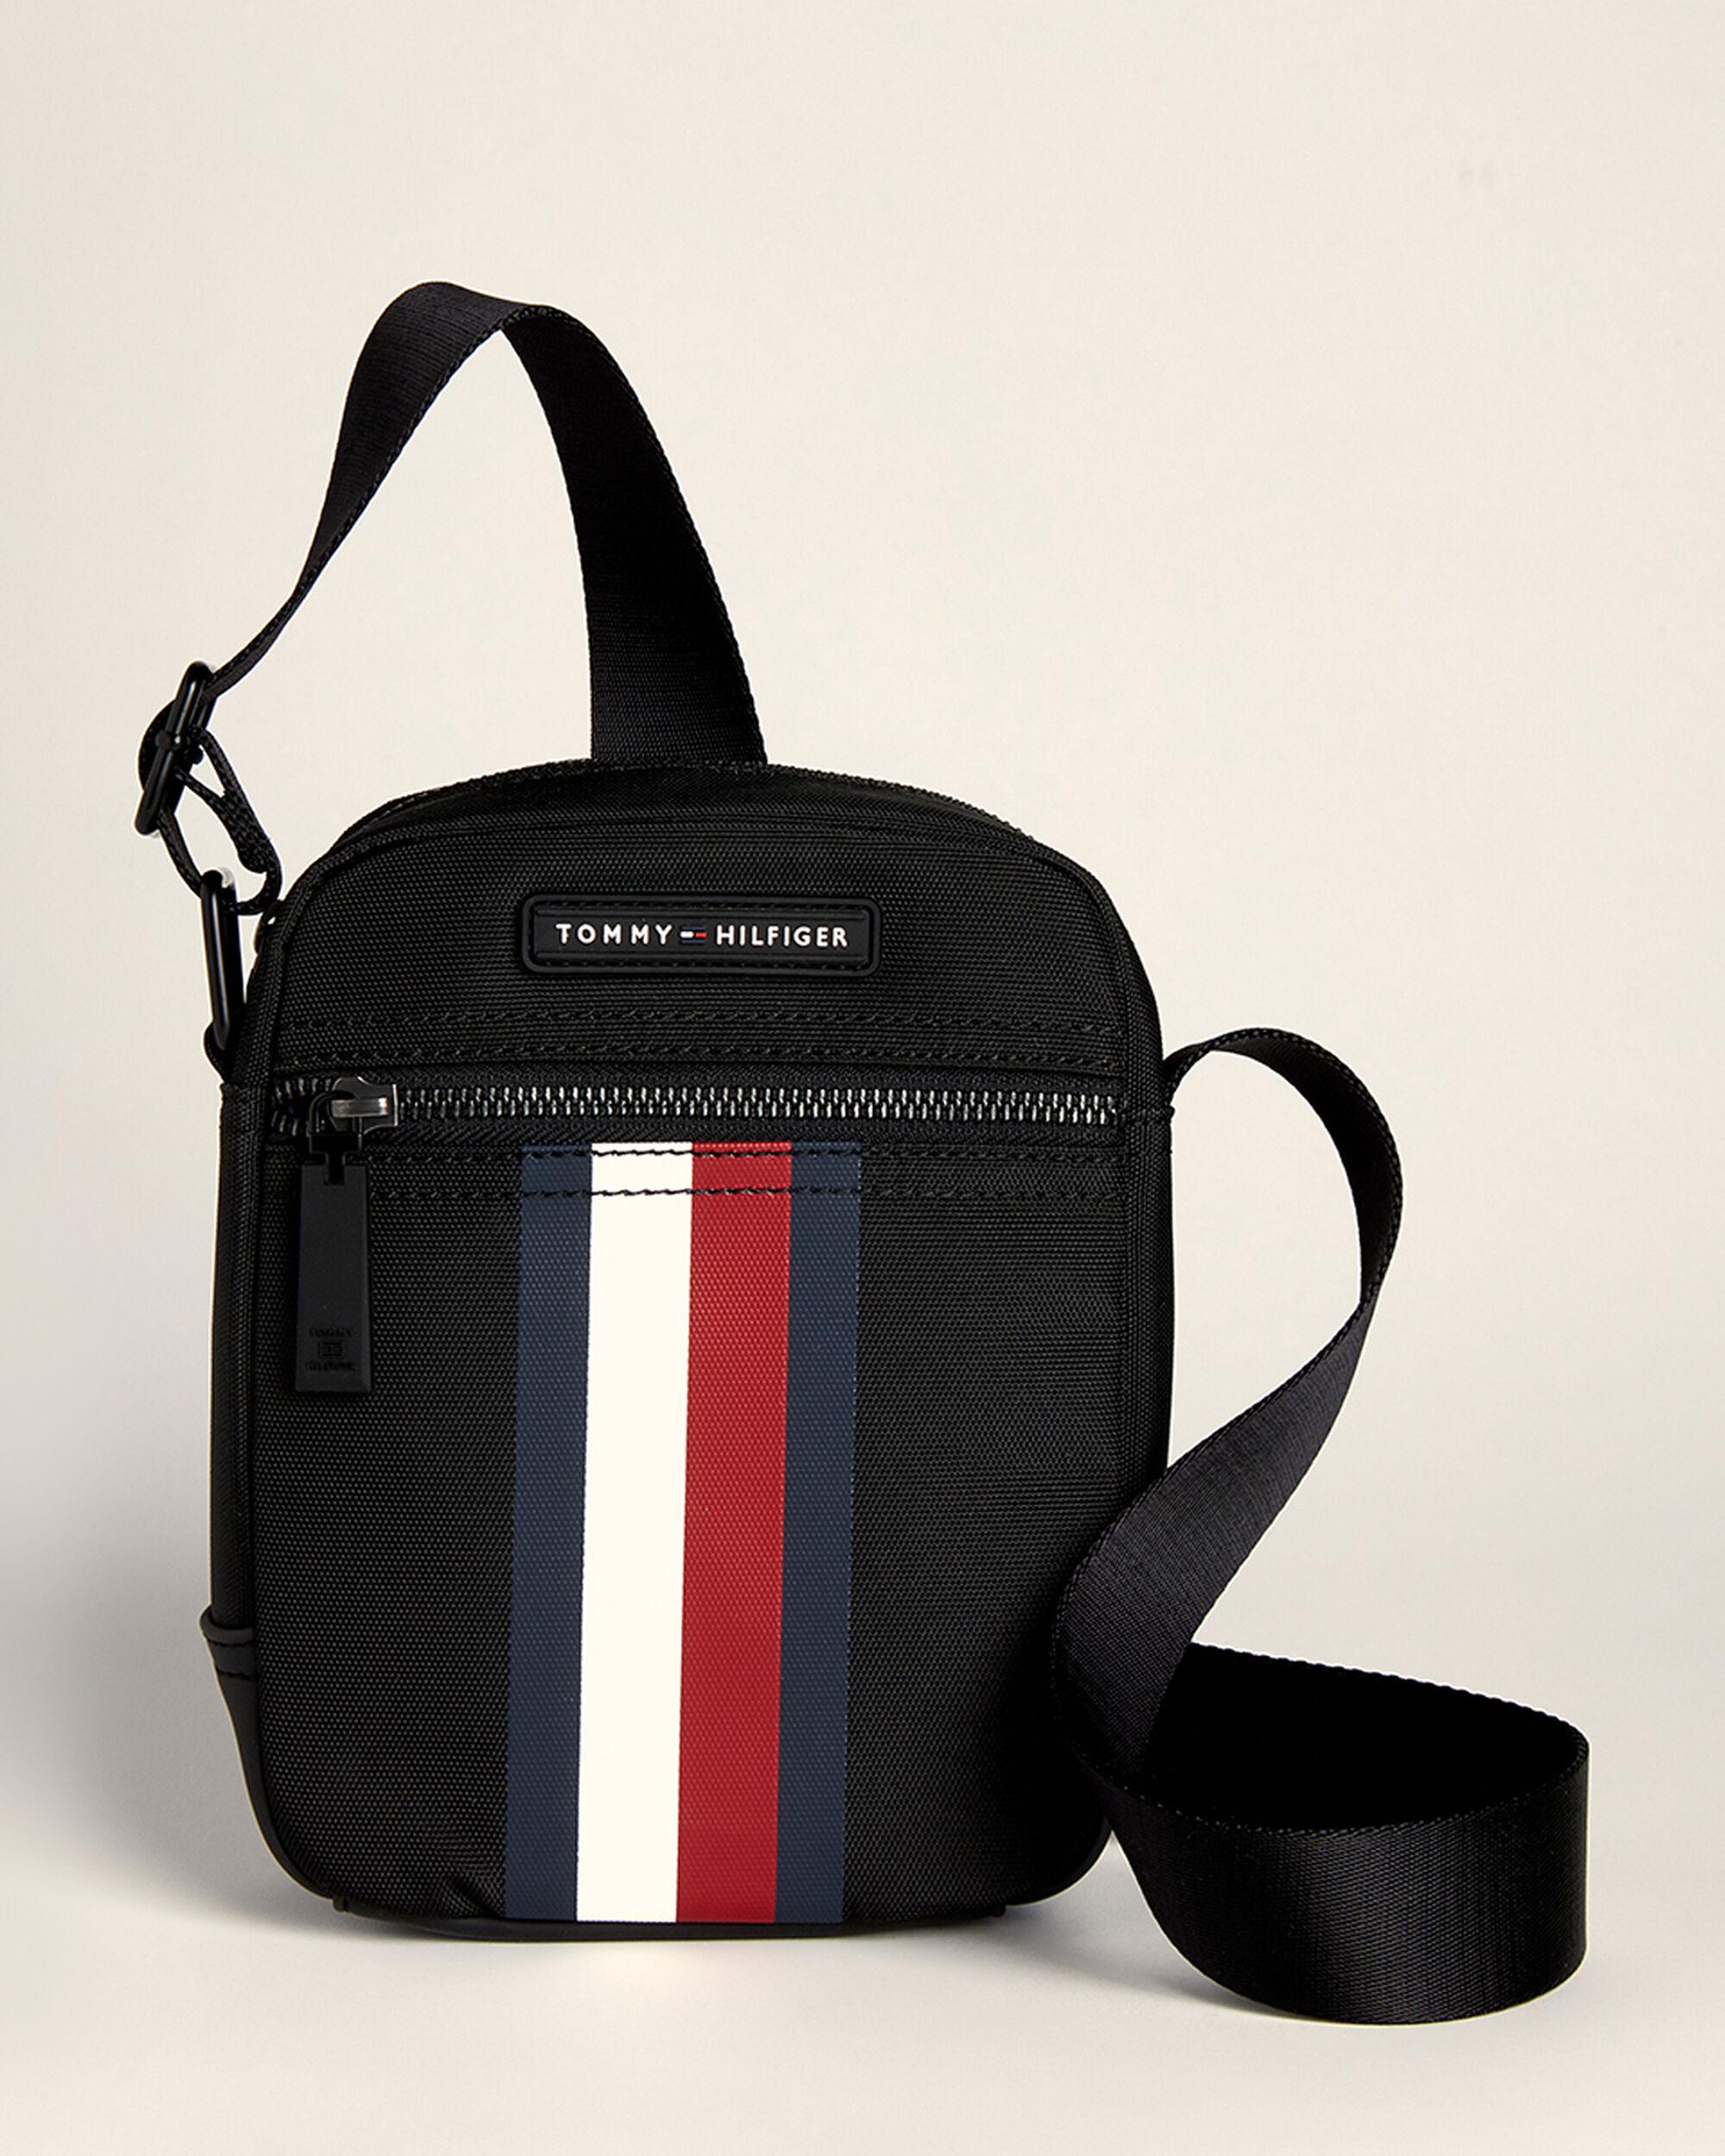 Century 21 Tommy Hilfiger Bags Clearance, SAVE 56%.